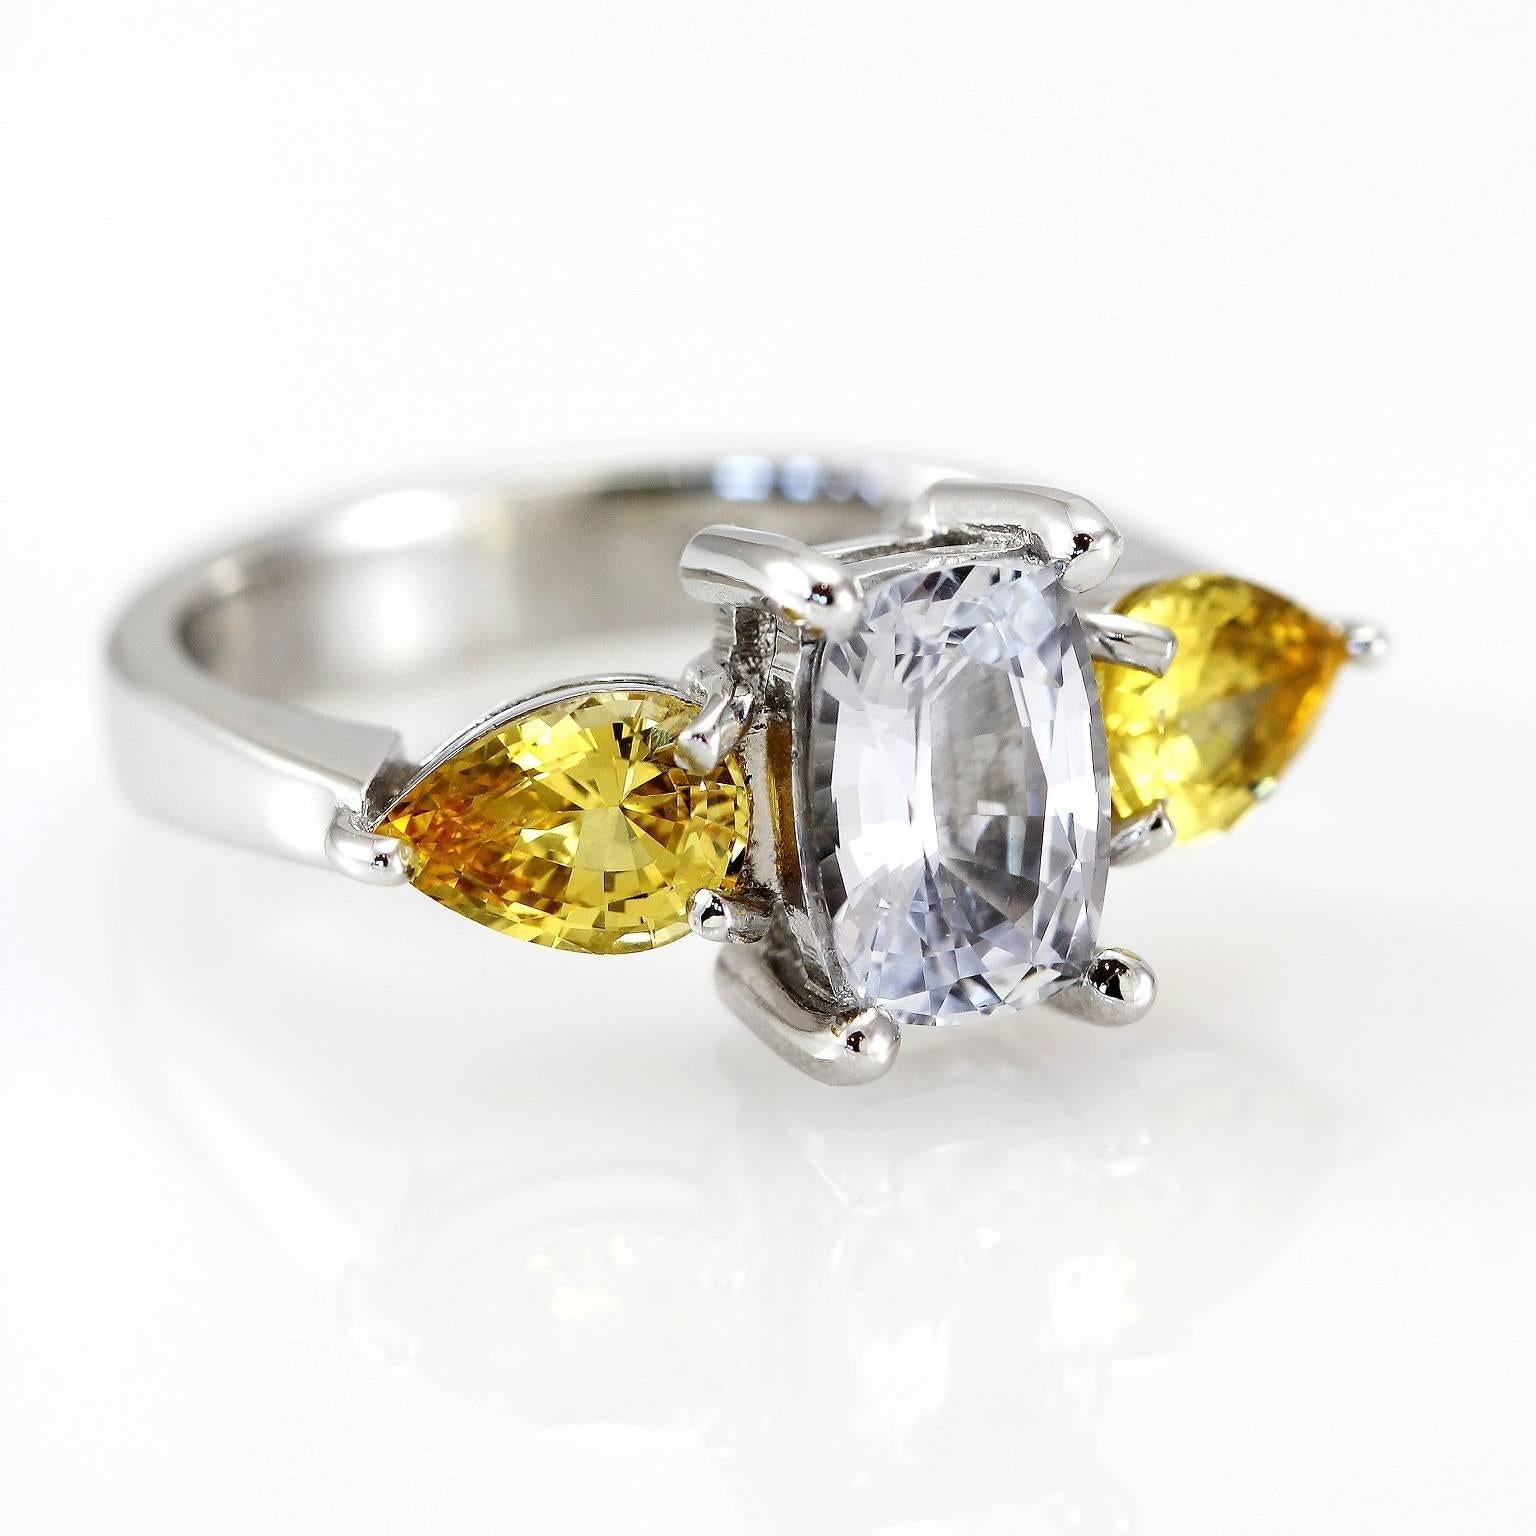 Bianca & Giallo Zaffiro Ring

This gorgeous dress ring in 18ct white gold is set with a lovely colourless sapphire in between a pair of eye-catching fancy yellow sapphires. 

Cushion faceted sapphire: colourless, 1.93ct

Pear faceted sapphires: